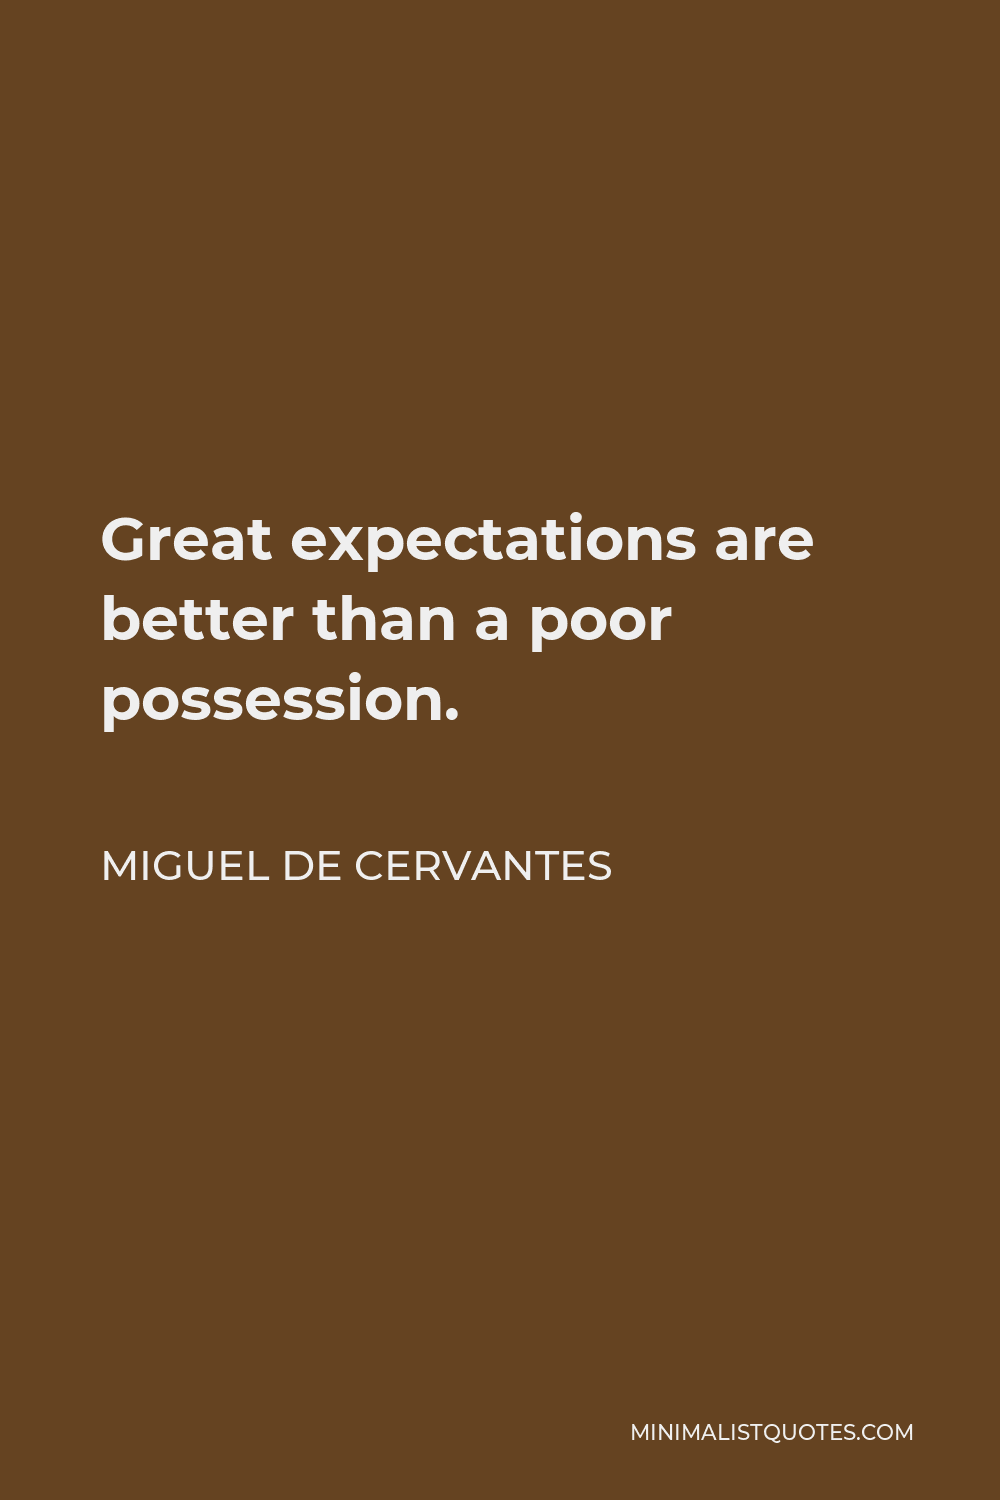 Miguel de Cervantes Quote - Great expectations are better than a poor possession.